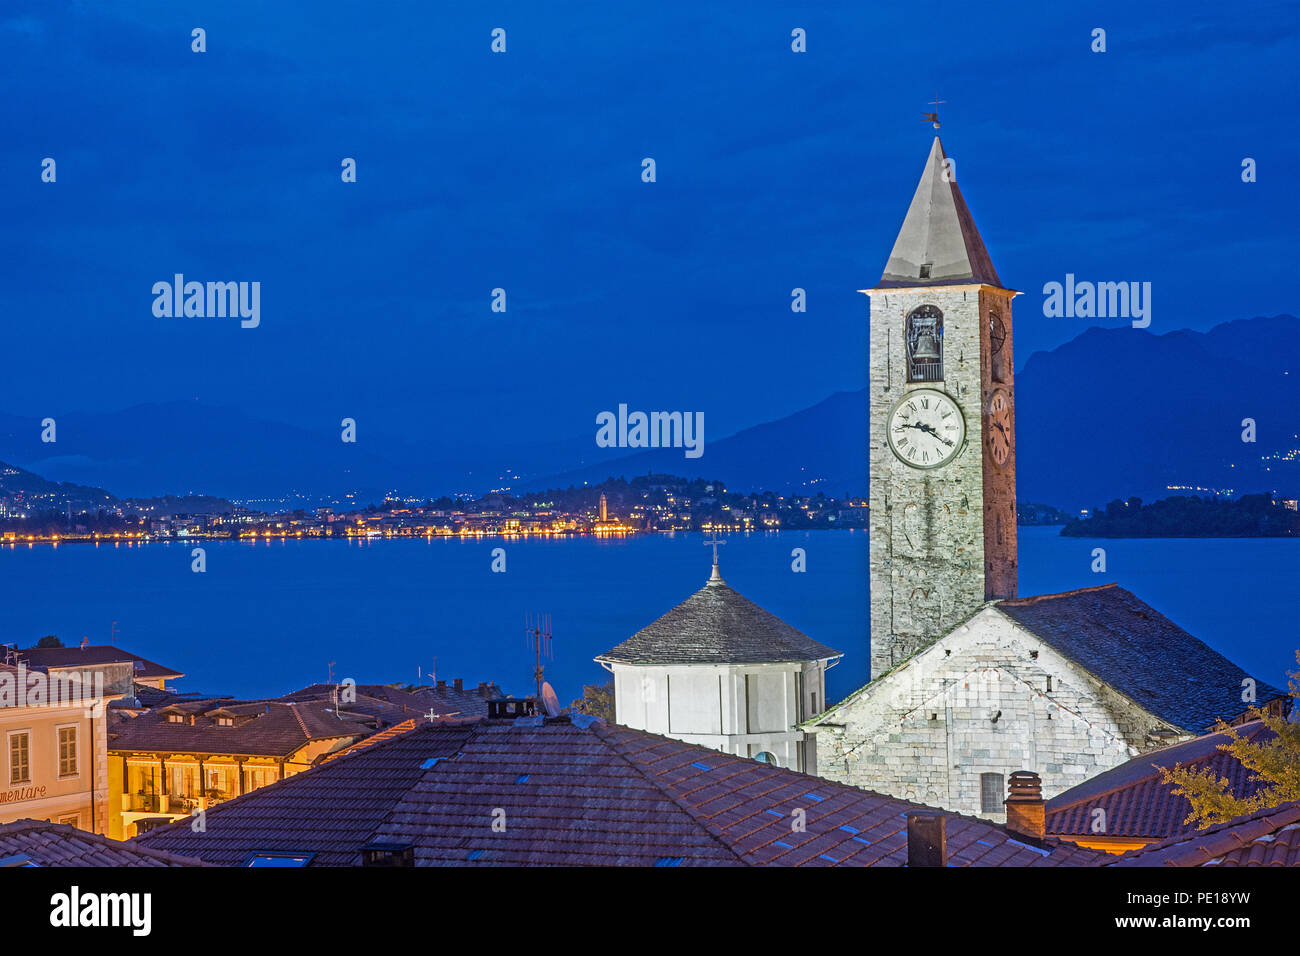 Blue hour view from roof top terrace of Hotel Rosa Baveno Italy with view of church clock tower and Lago Maggiore showing floodlit church and sparklin Stock Photo